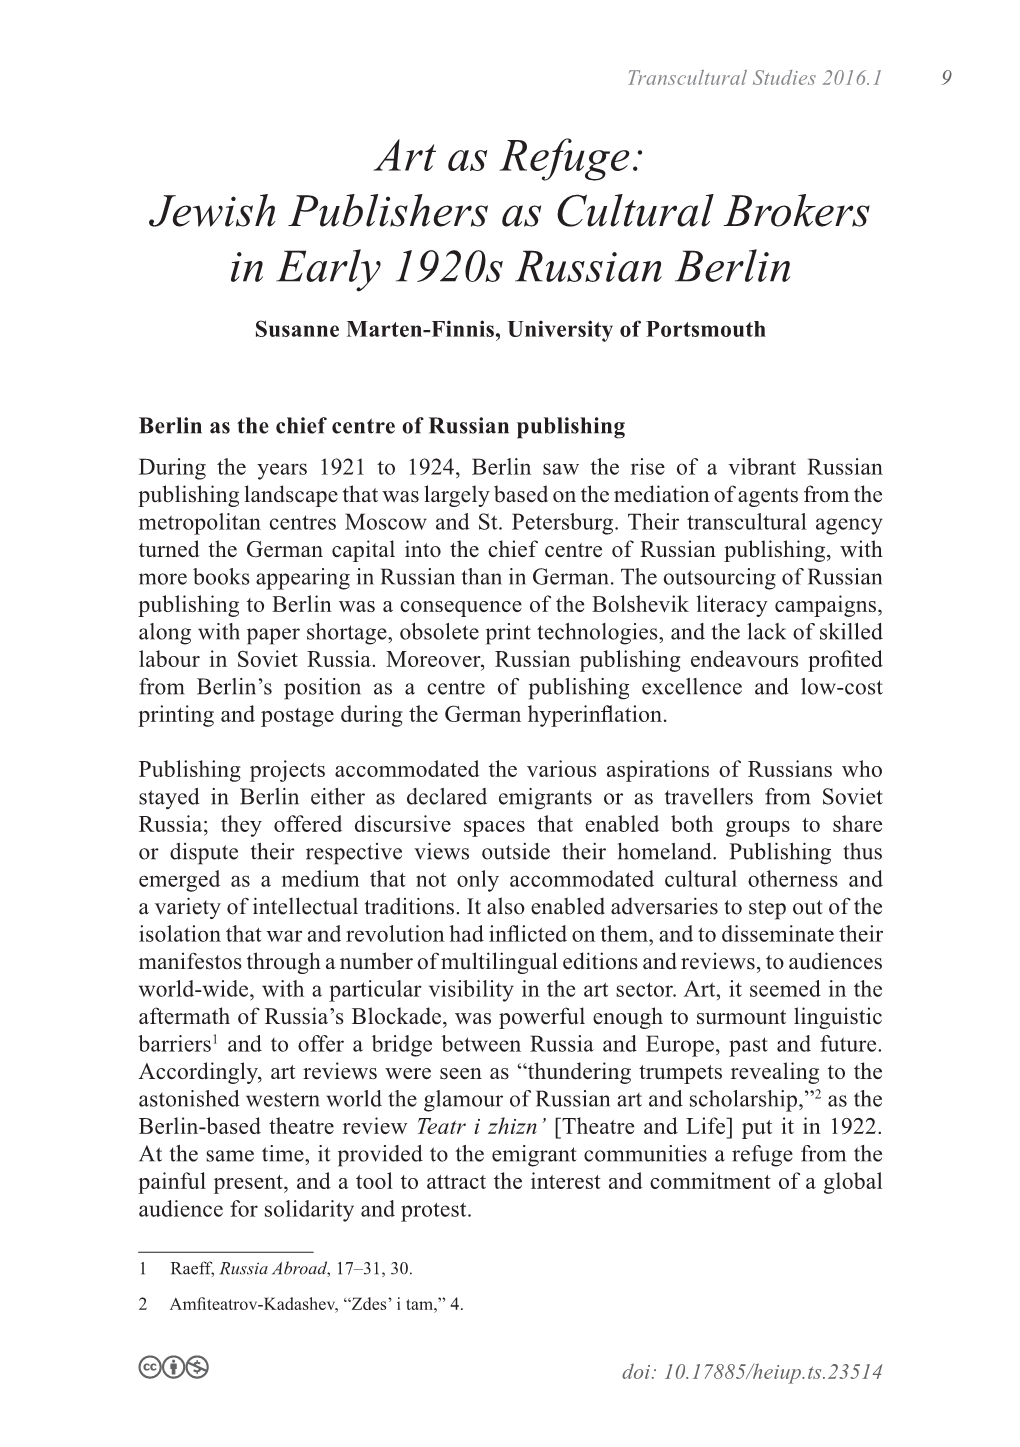 Art As Refuge: Jewish Publishers As Cultural Brokers in Early 1920S Russian Berlin